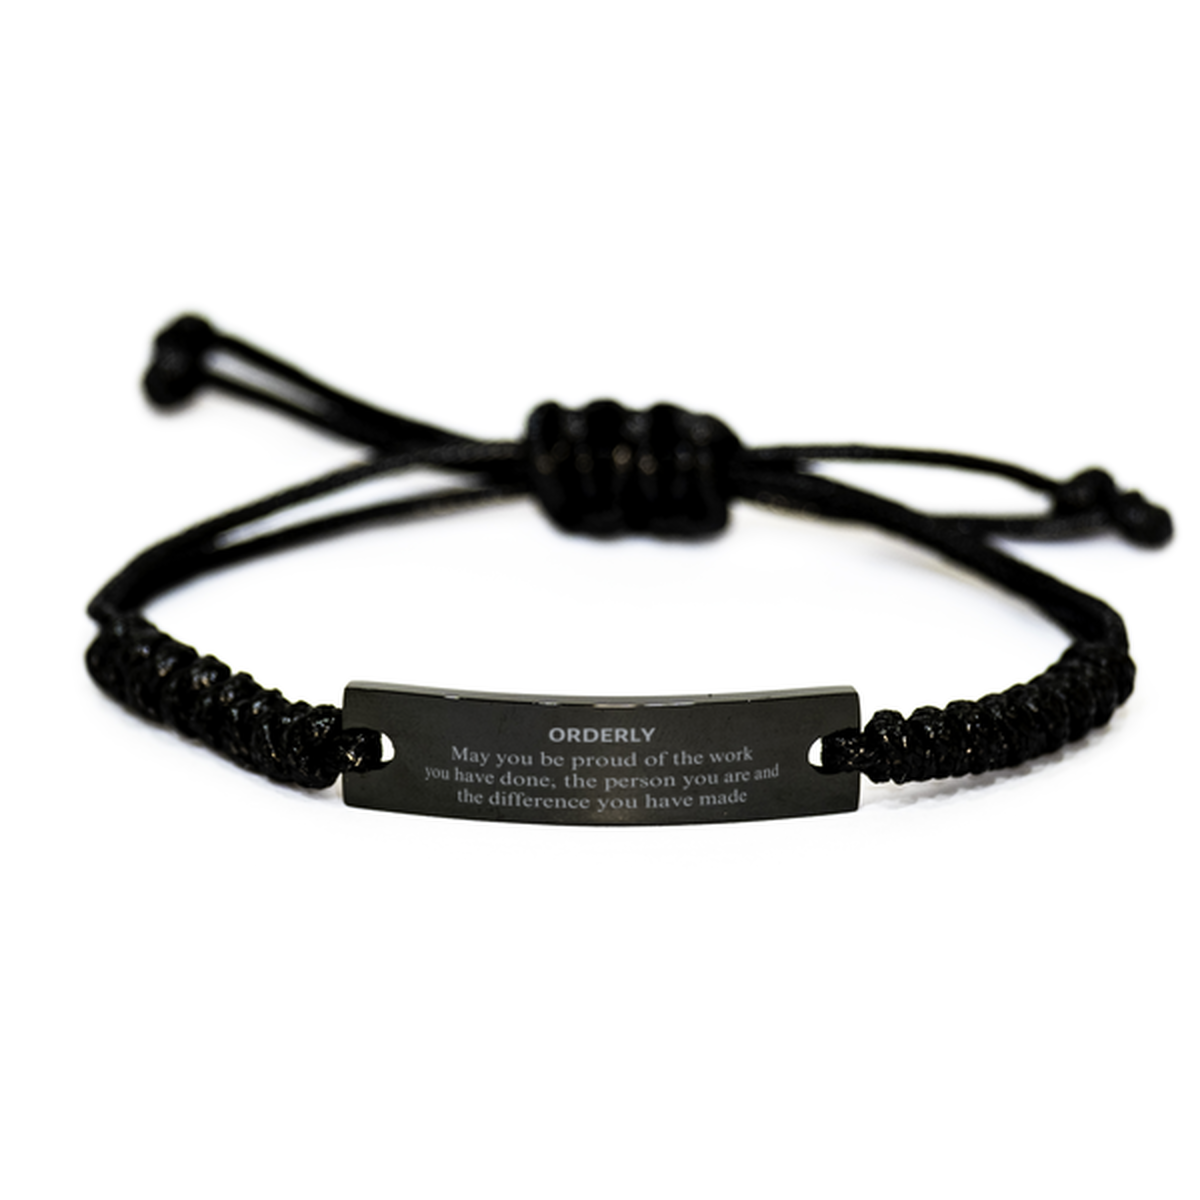 Orderly May you be proud of the work you have done, Retirement Orderly Black Rope Bracelet for Colleague Appreciation Gifts Amazing for Orderly